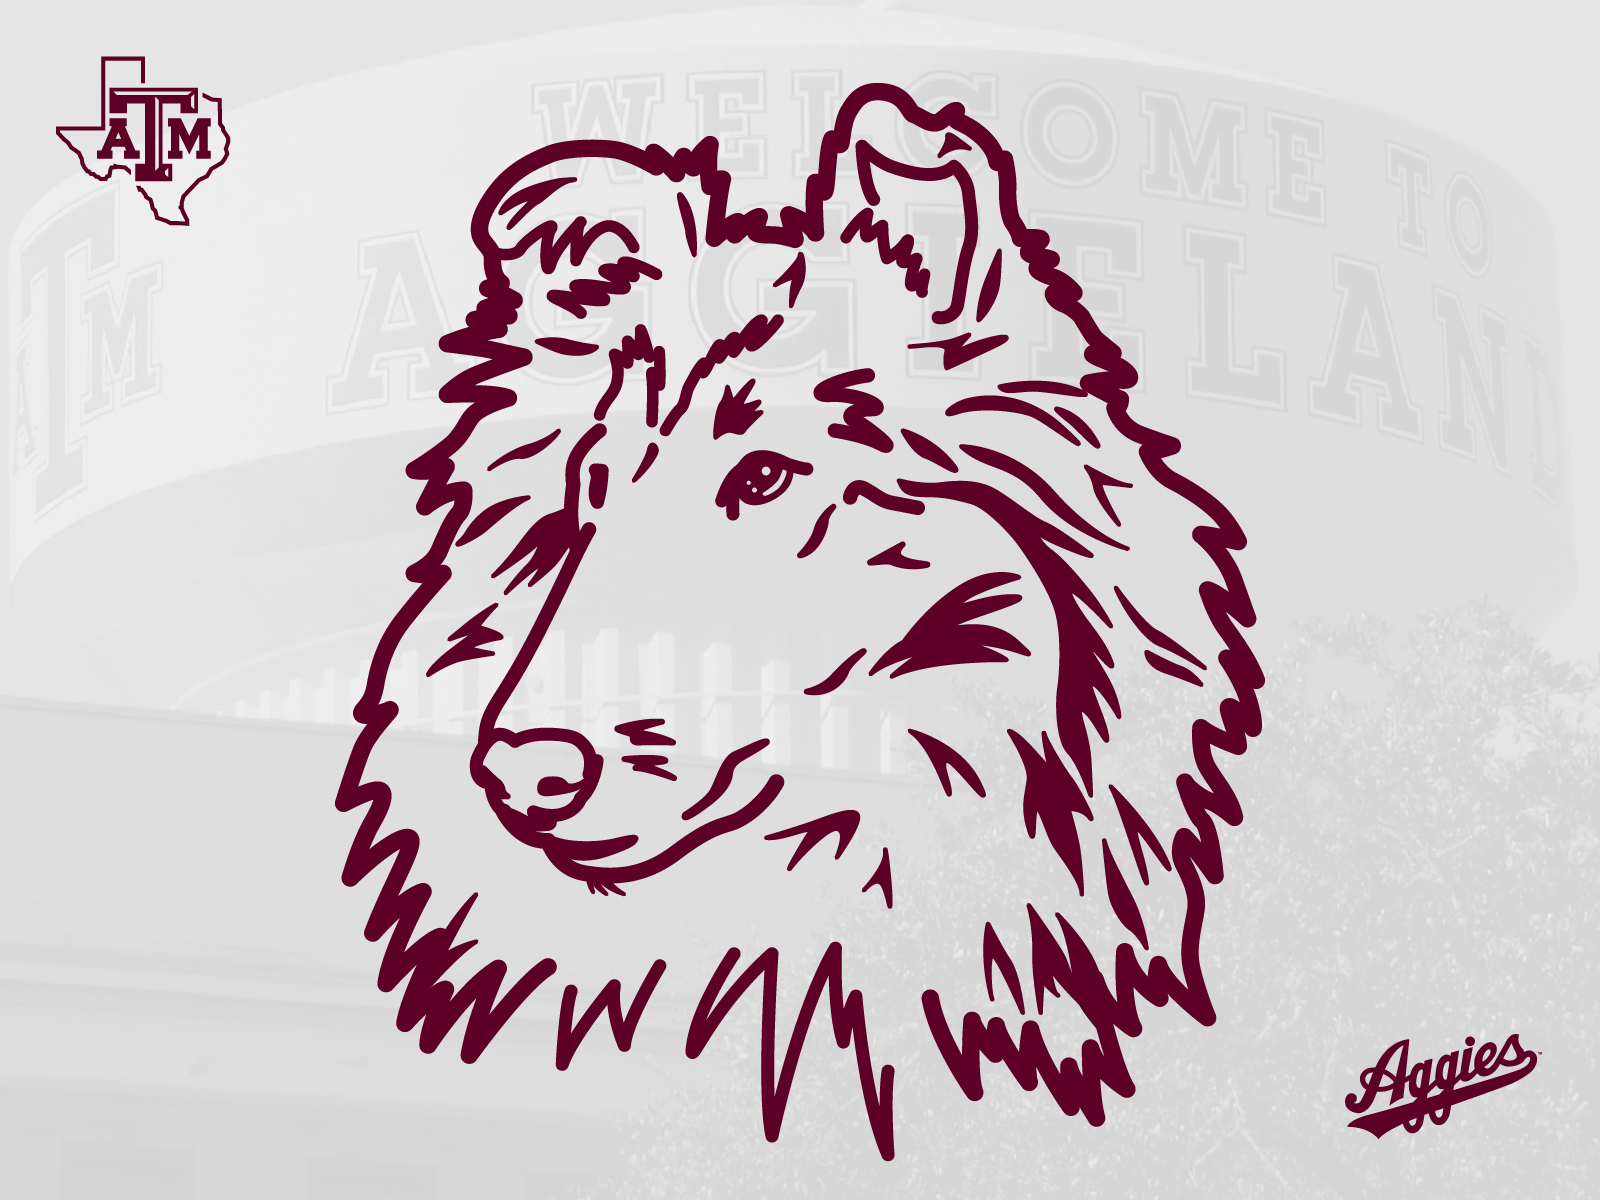 Miss Reveille, Texas A&M mascot by Kevin Spahn on Dribbble